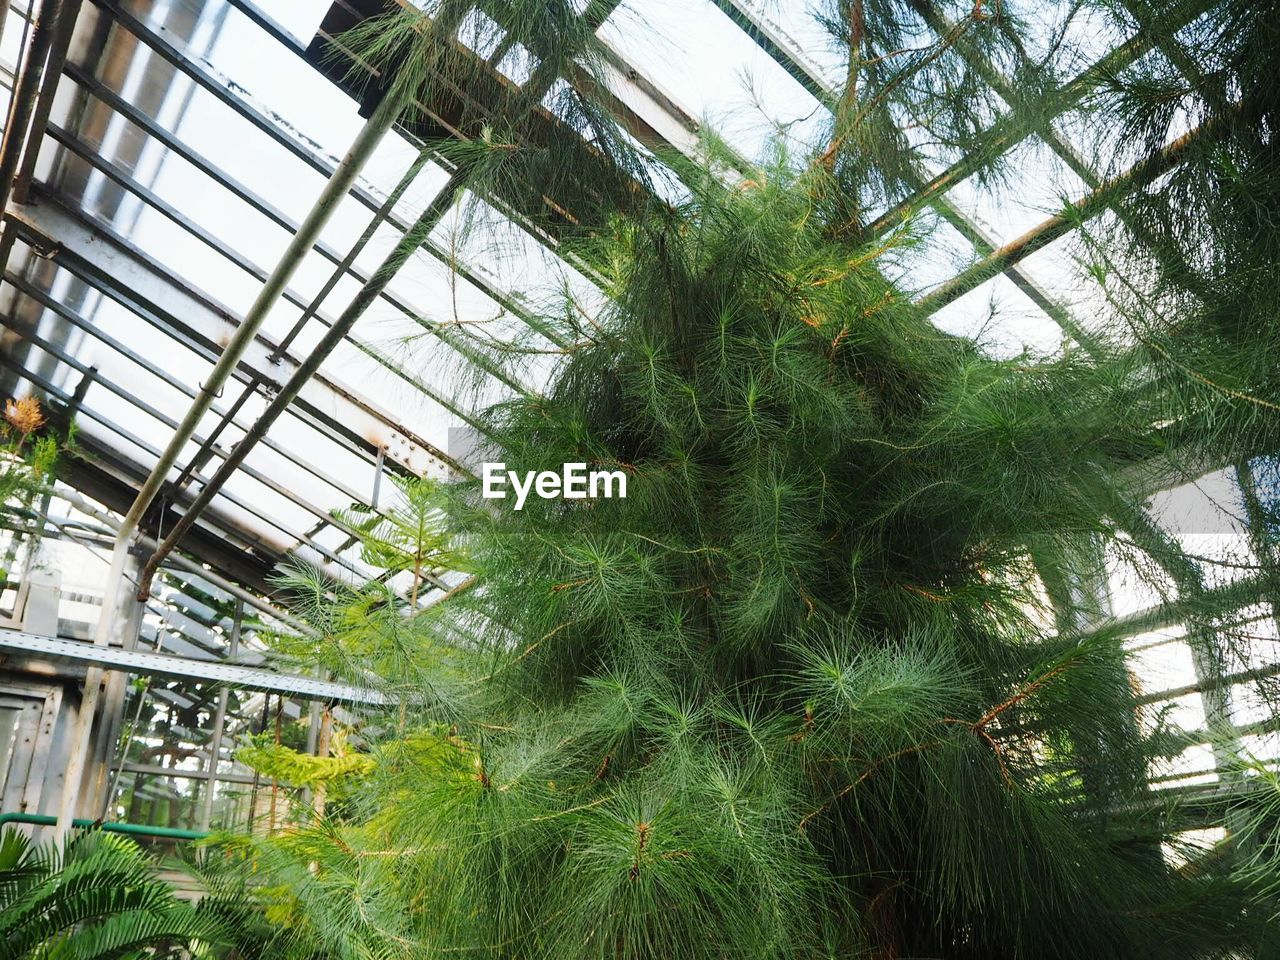 LOW ANGLE VIEW OF TREES SEEN THROUGH GREENHOUSE